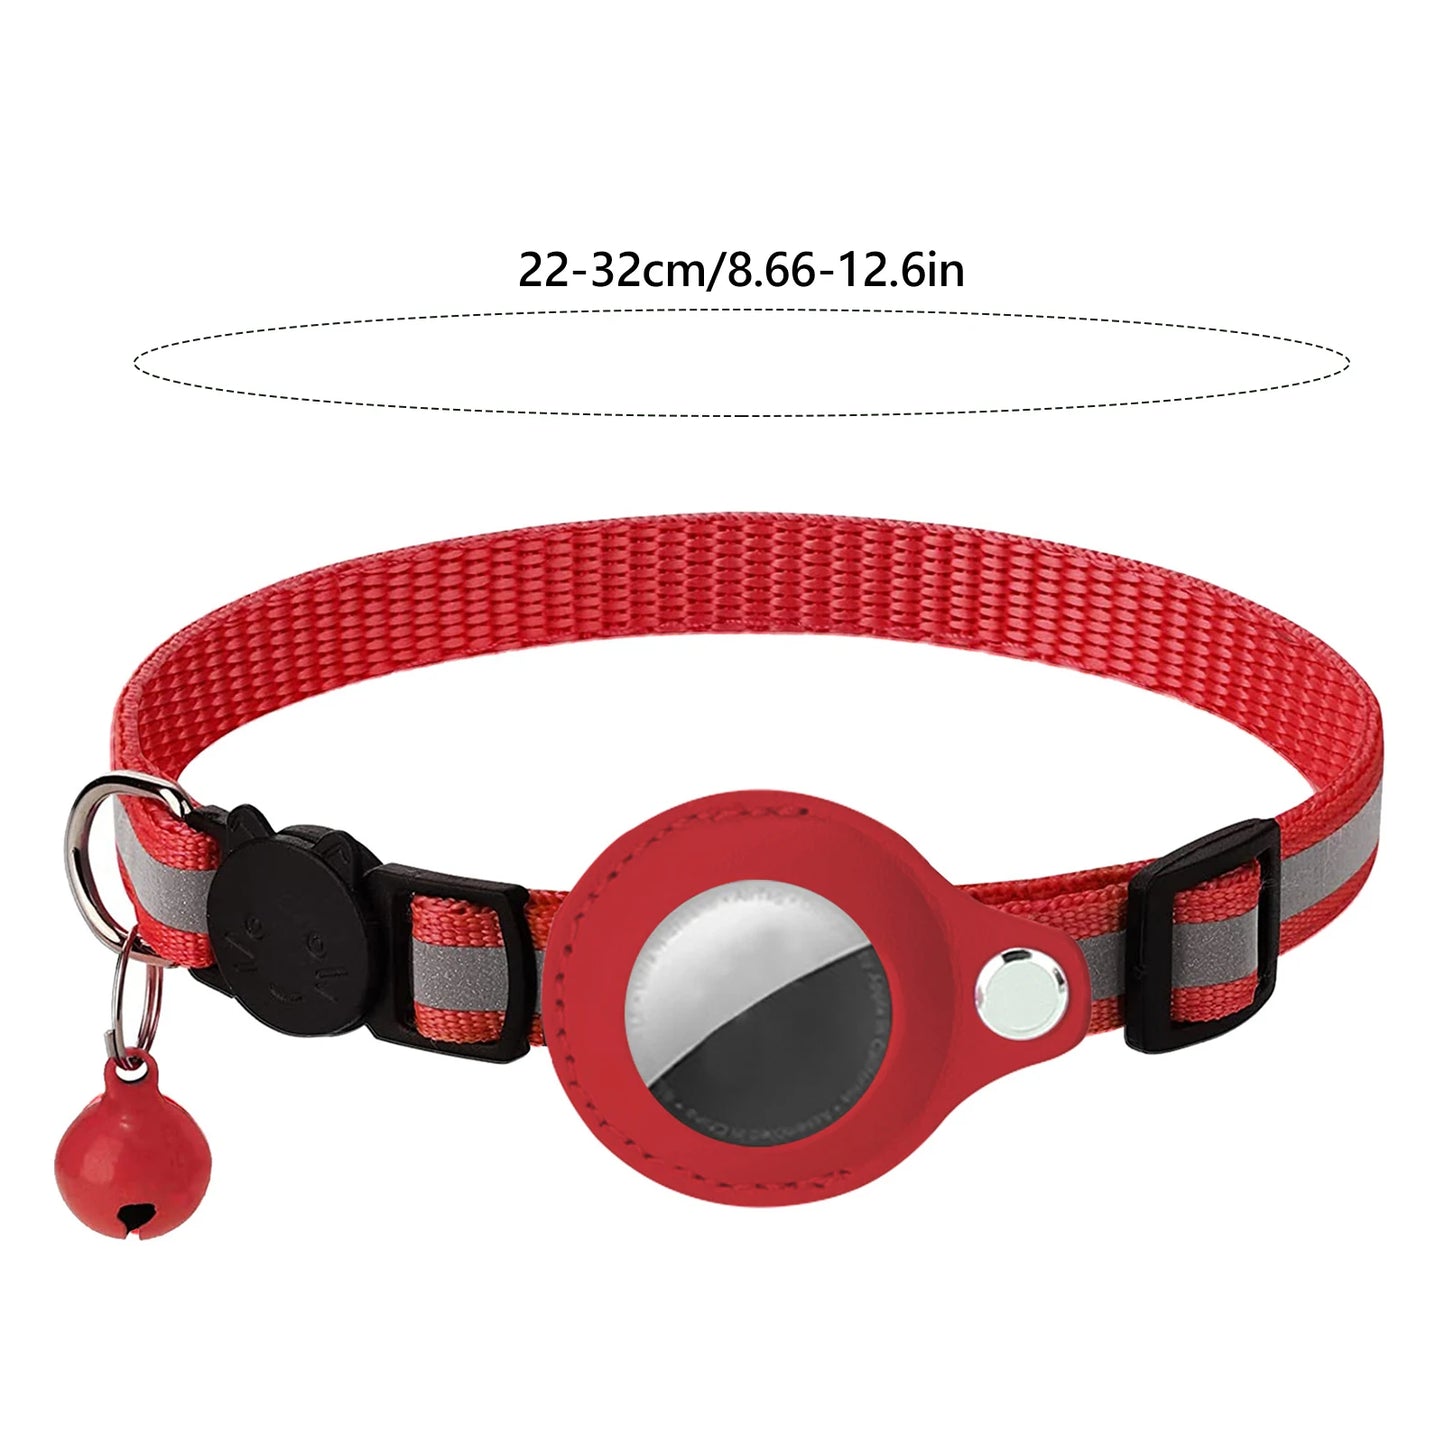 Reflective GPS Cat Collar With Locator Holders and Safety Bell